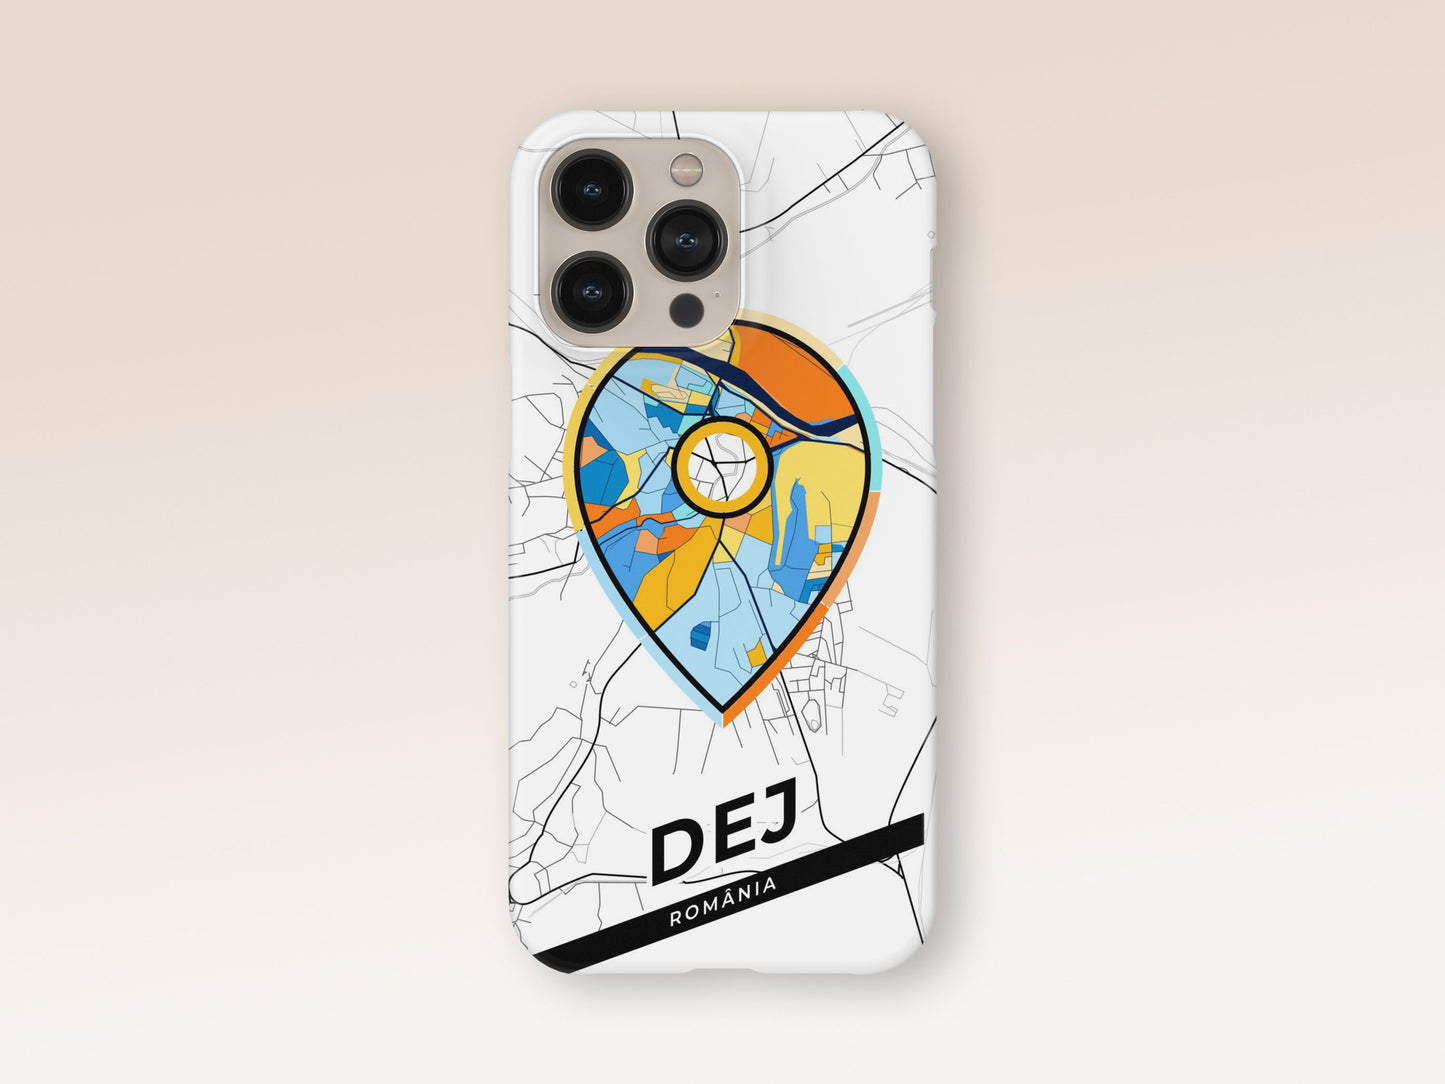 Dej Romania slim phone case with colorful icon. Birthday, wedding or housewarming gift. Couple match cases. 1